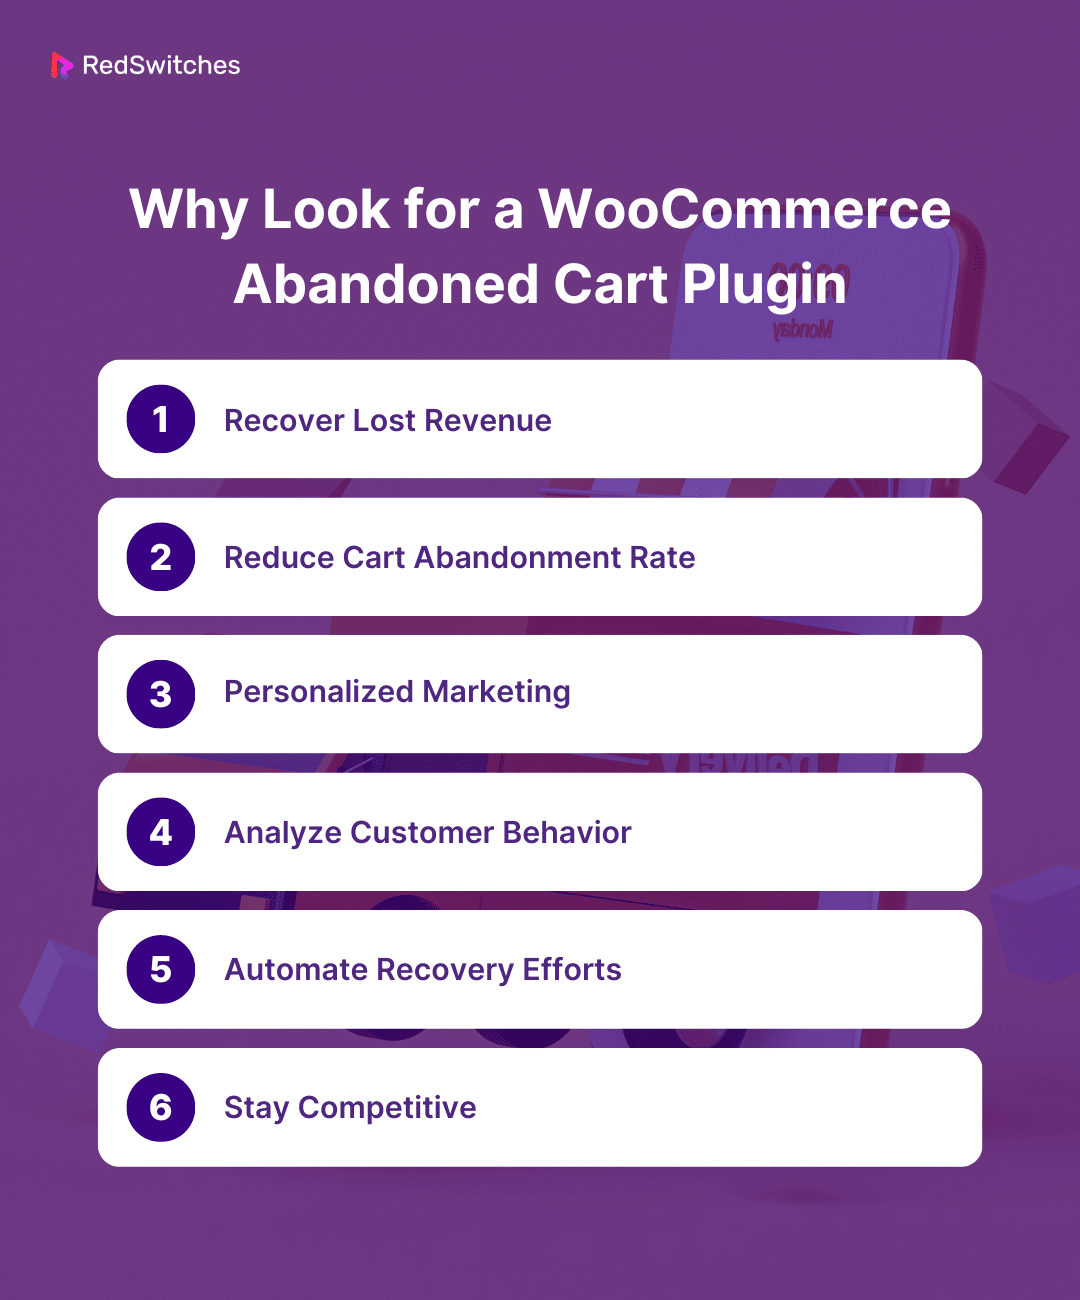 Why Look for a WooCommerce Abandoned Cart Plugin